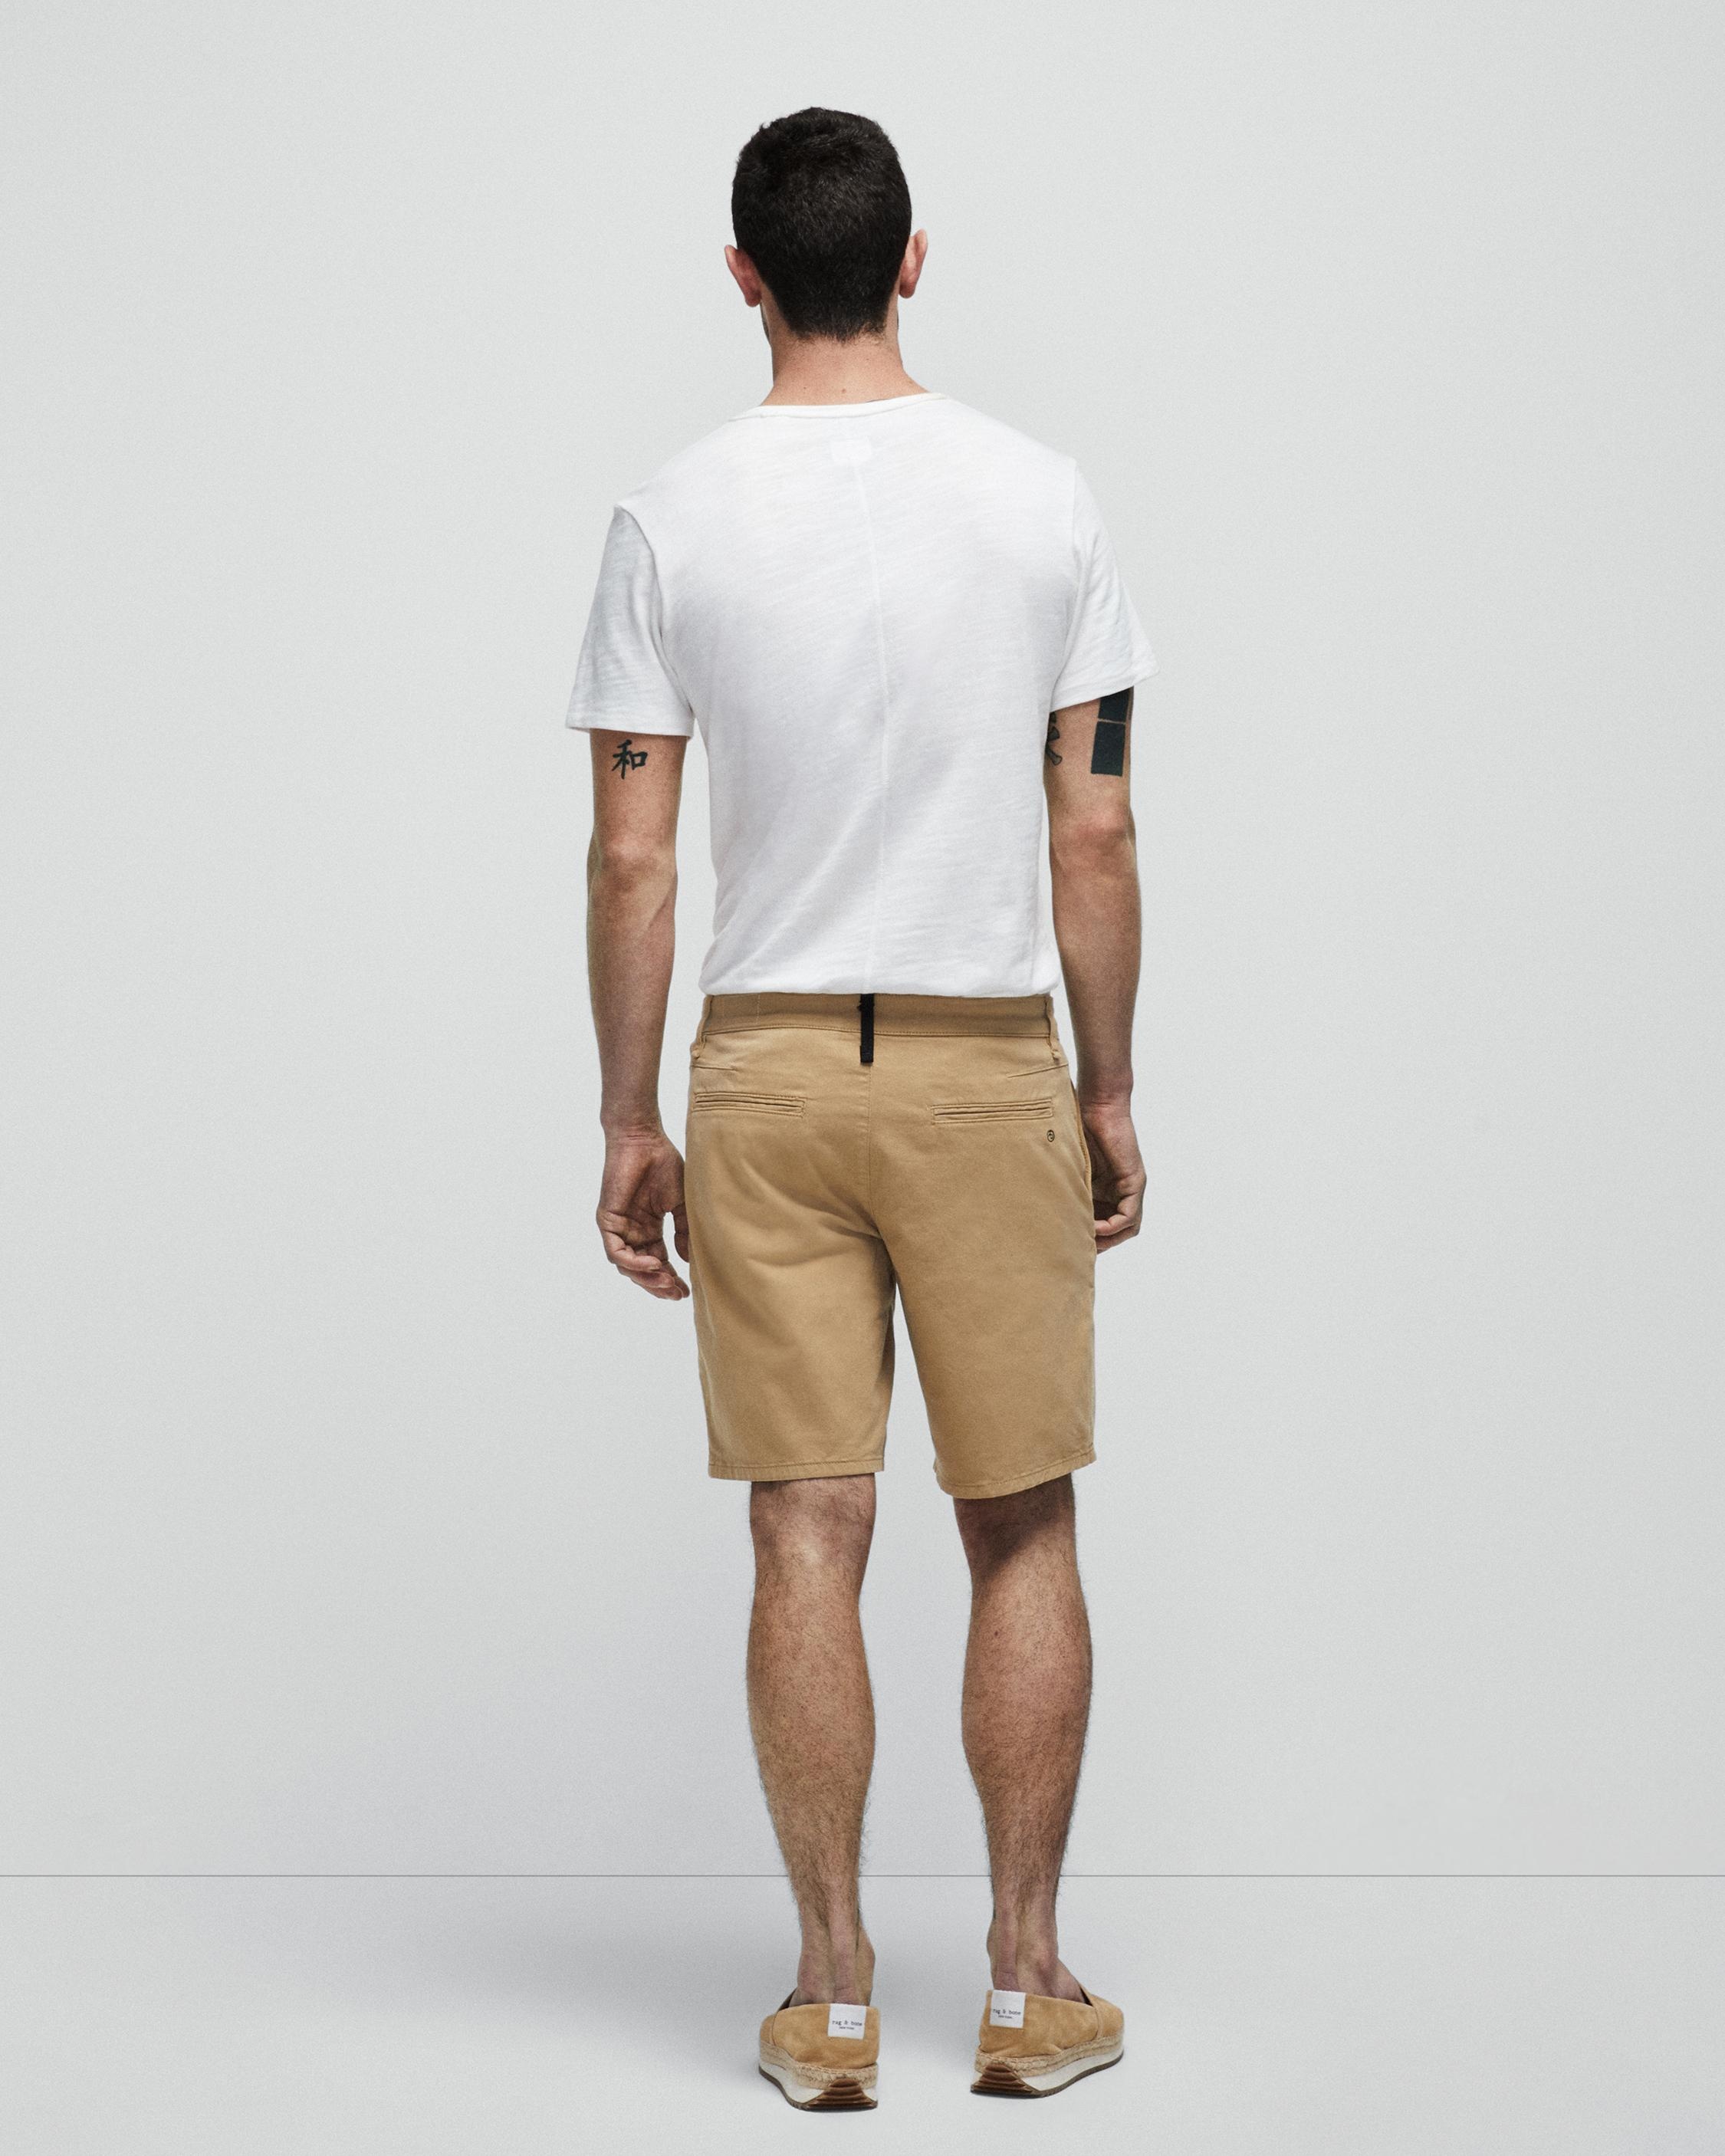 Perry Cotton Stretch Twill Short
Slim Fit Short - 6